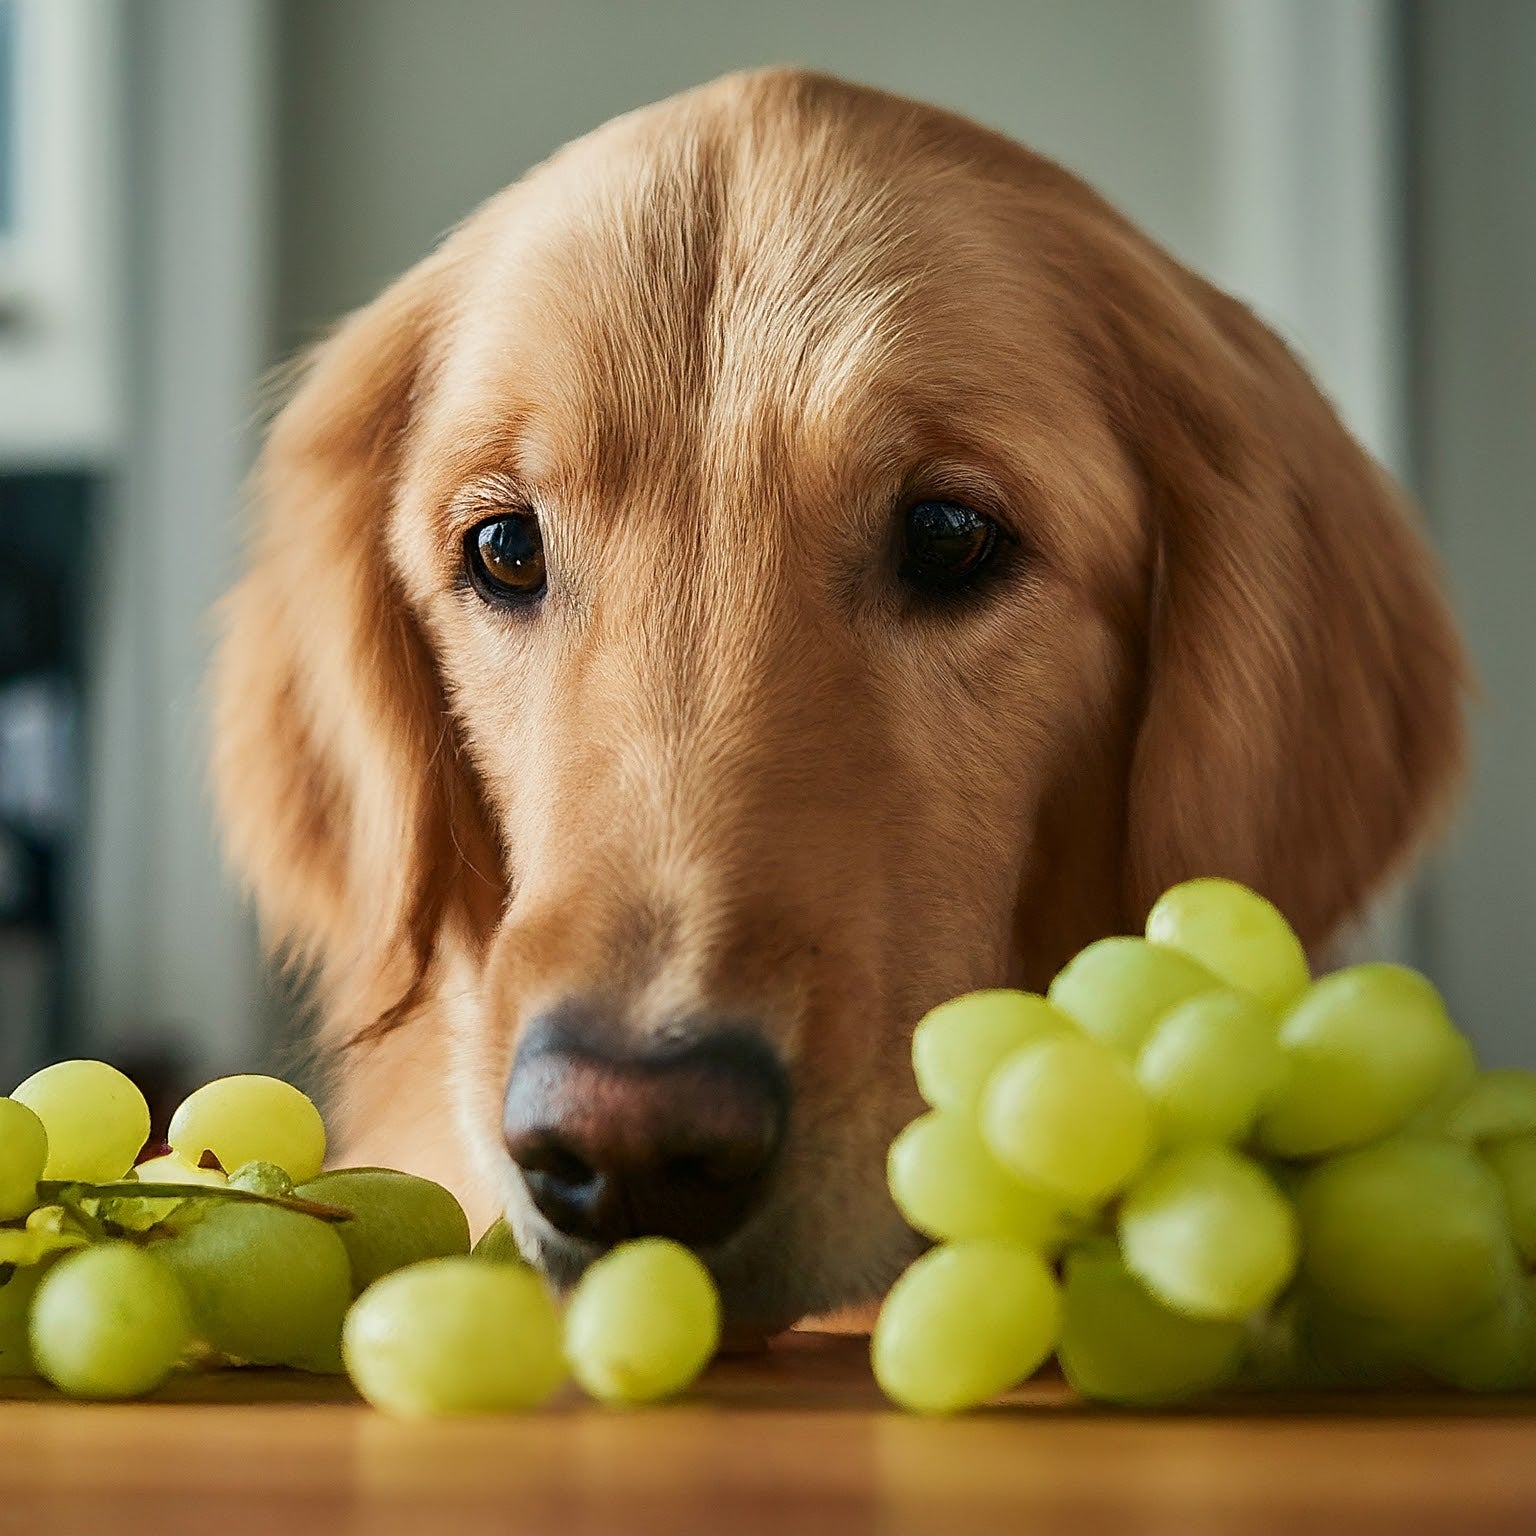 Foods that could potentially harm your dog